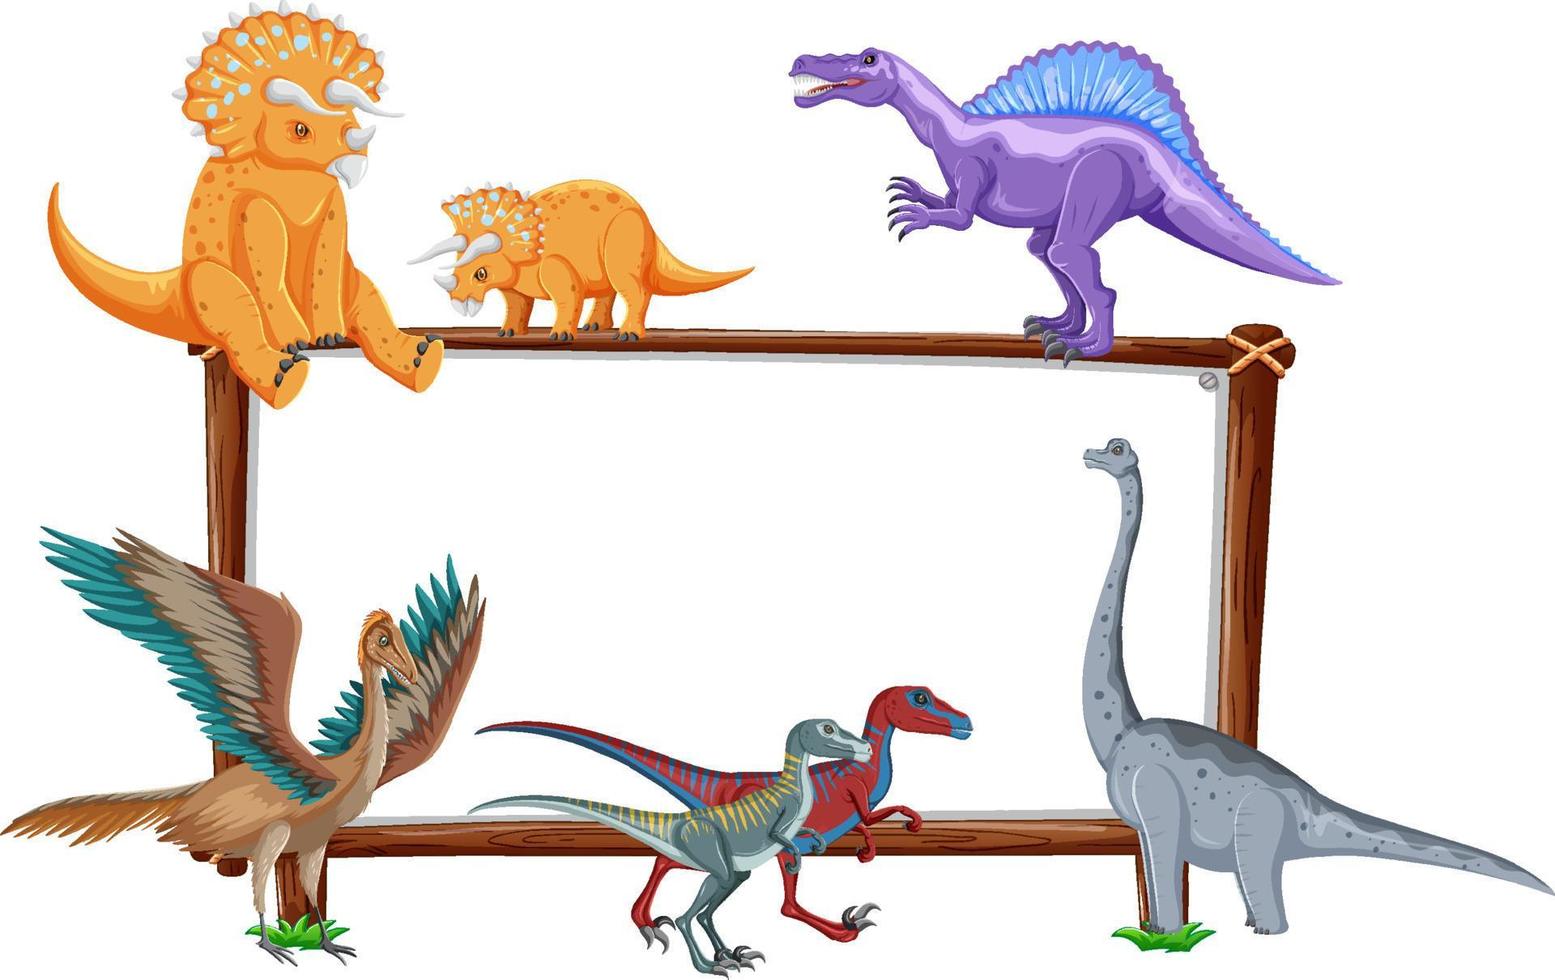 Group of dinosaurs around board on white background vector